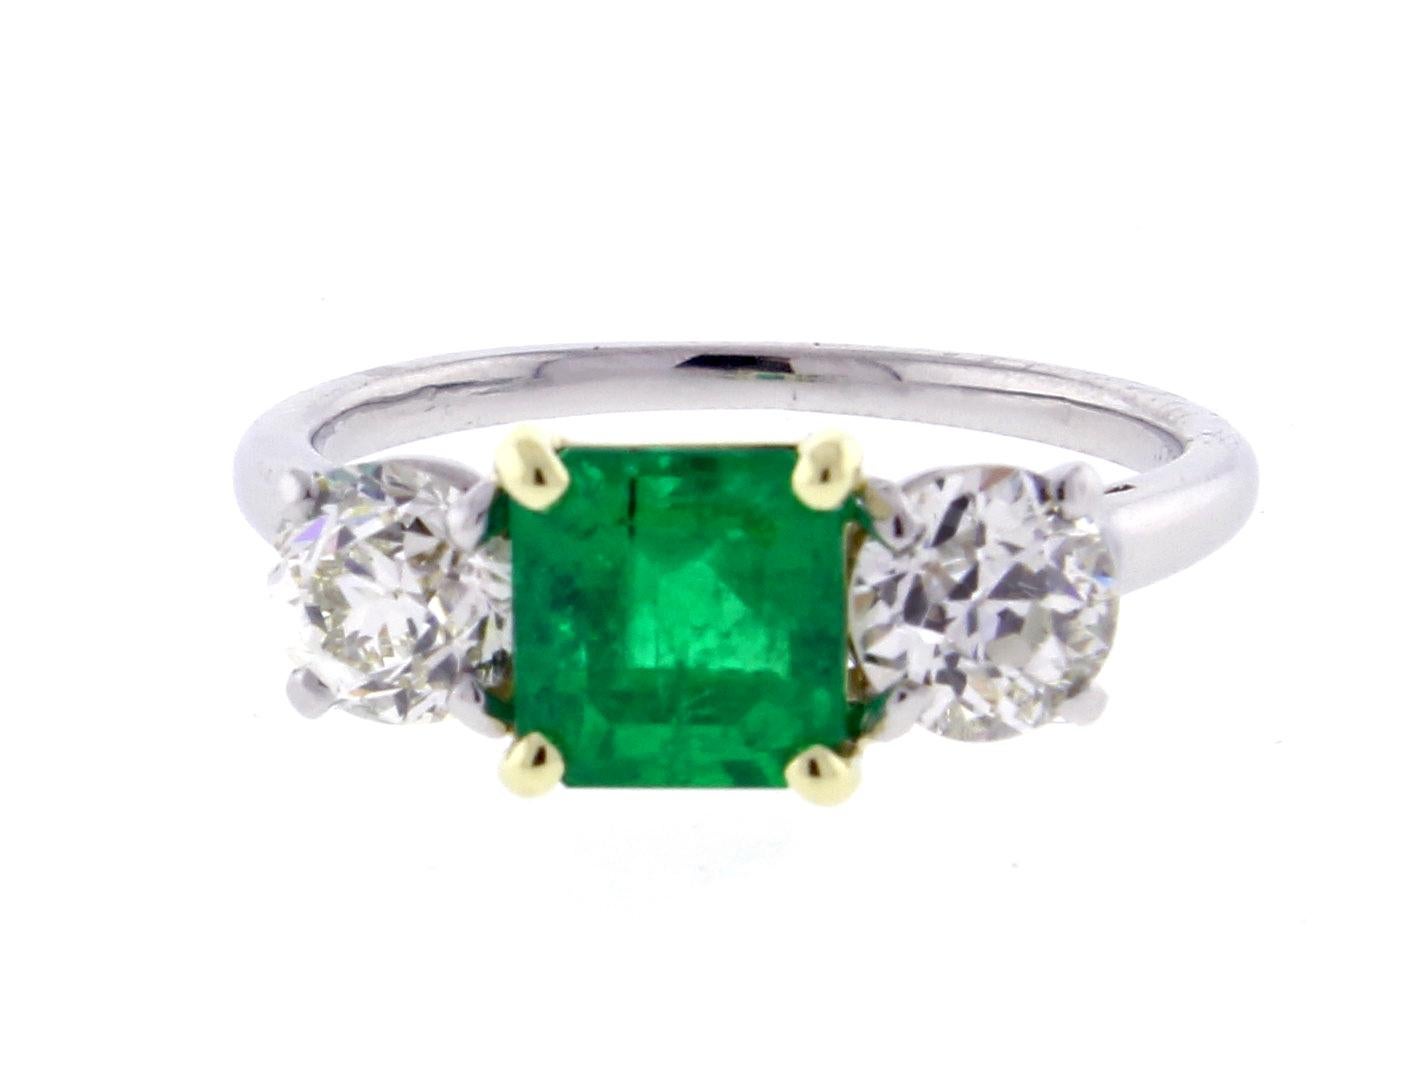 From Cartier, an Emerald and diamond three -stone ring. The center Emerald weighs 1.35 carats. The two side Old European cut diamonds weigh 1.35 carats total and are H color and VS clarity. The ring is platinum with the emerald set in 18 karat